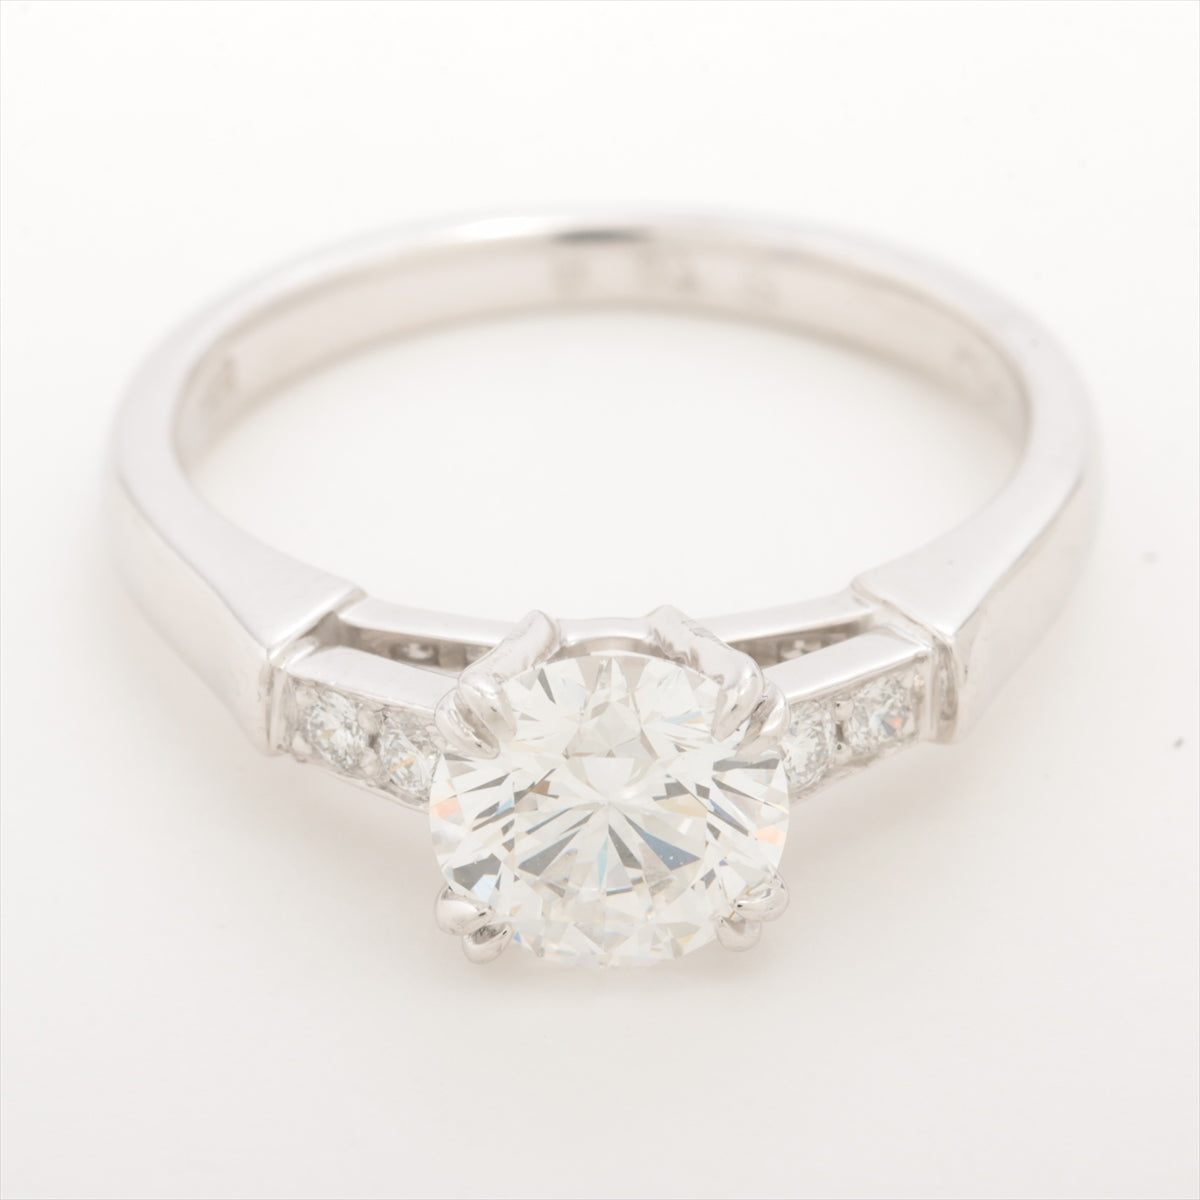 Harry Winston Triste diamond rings Pt950 4.3g 0.90 F VS1 EX NONE Published by GIA 2007